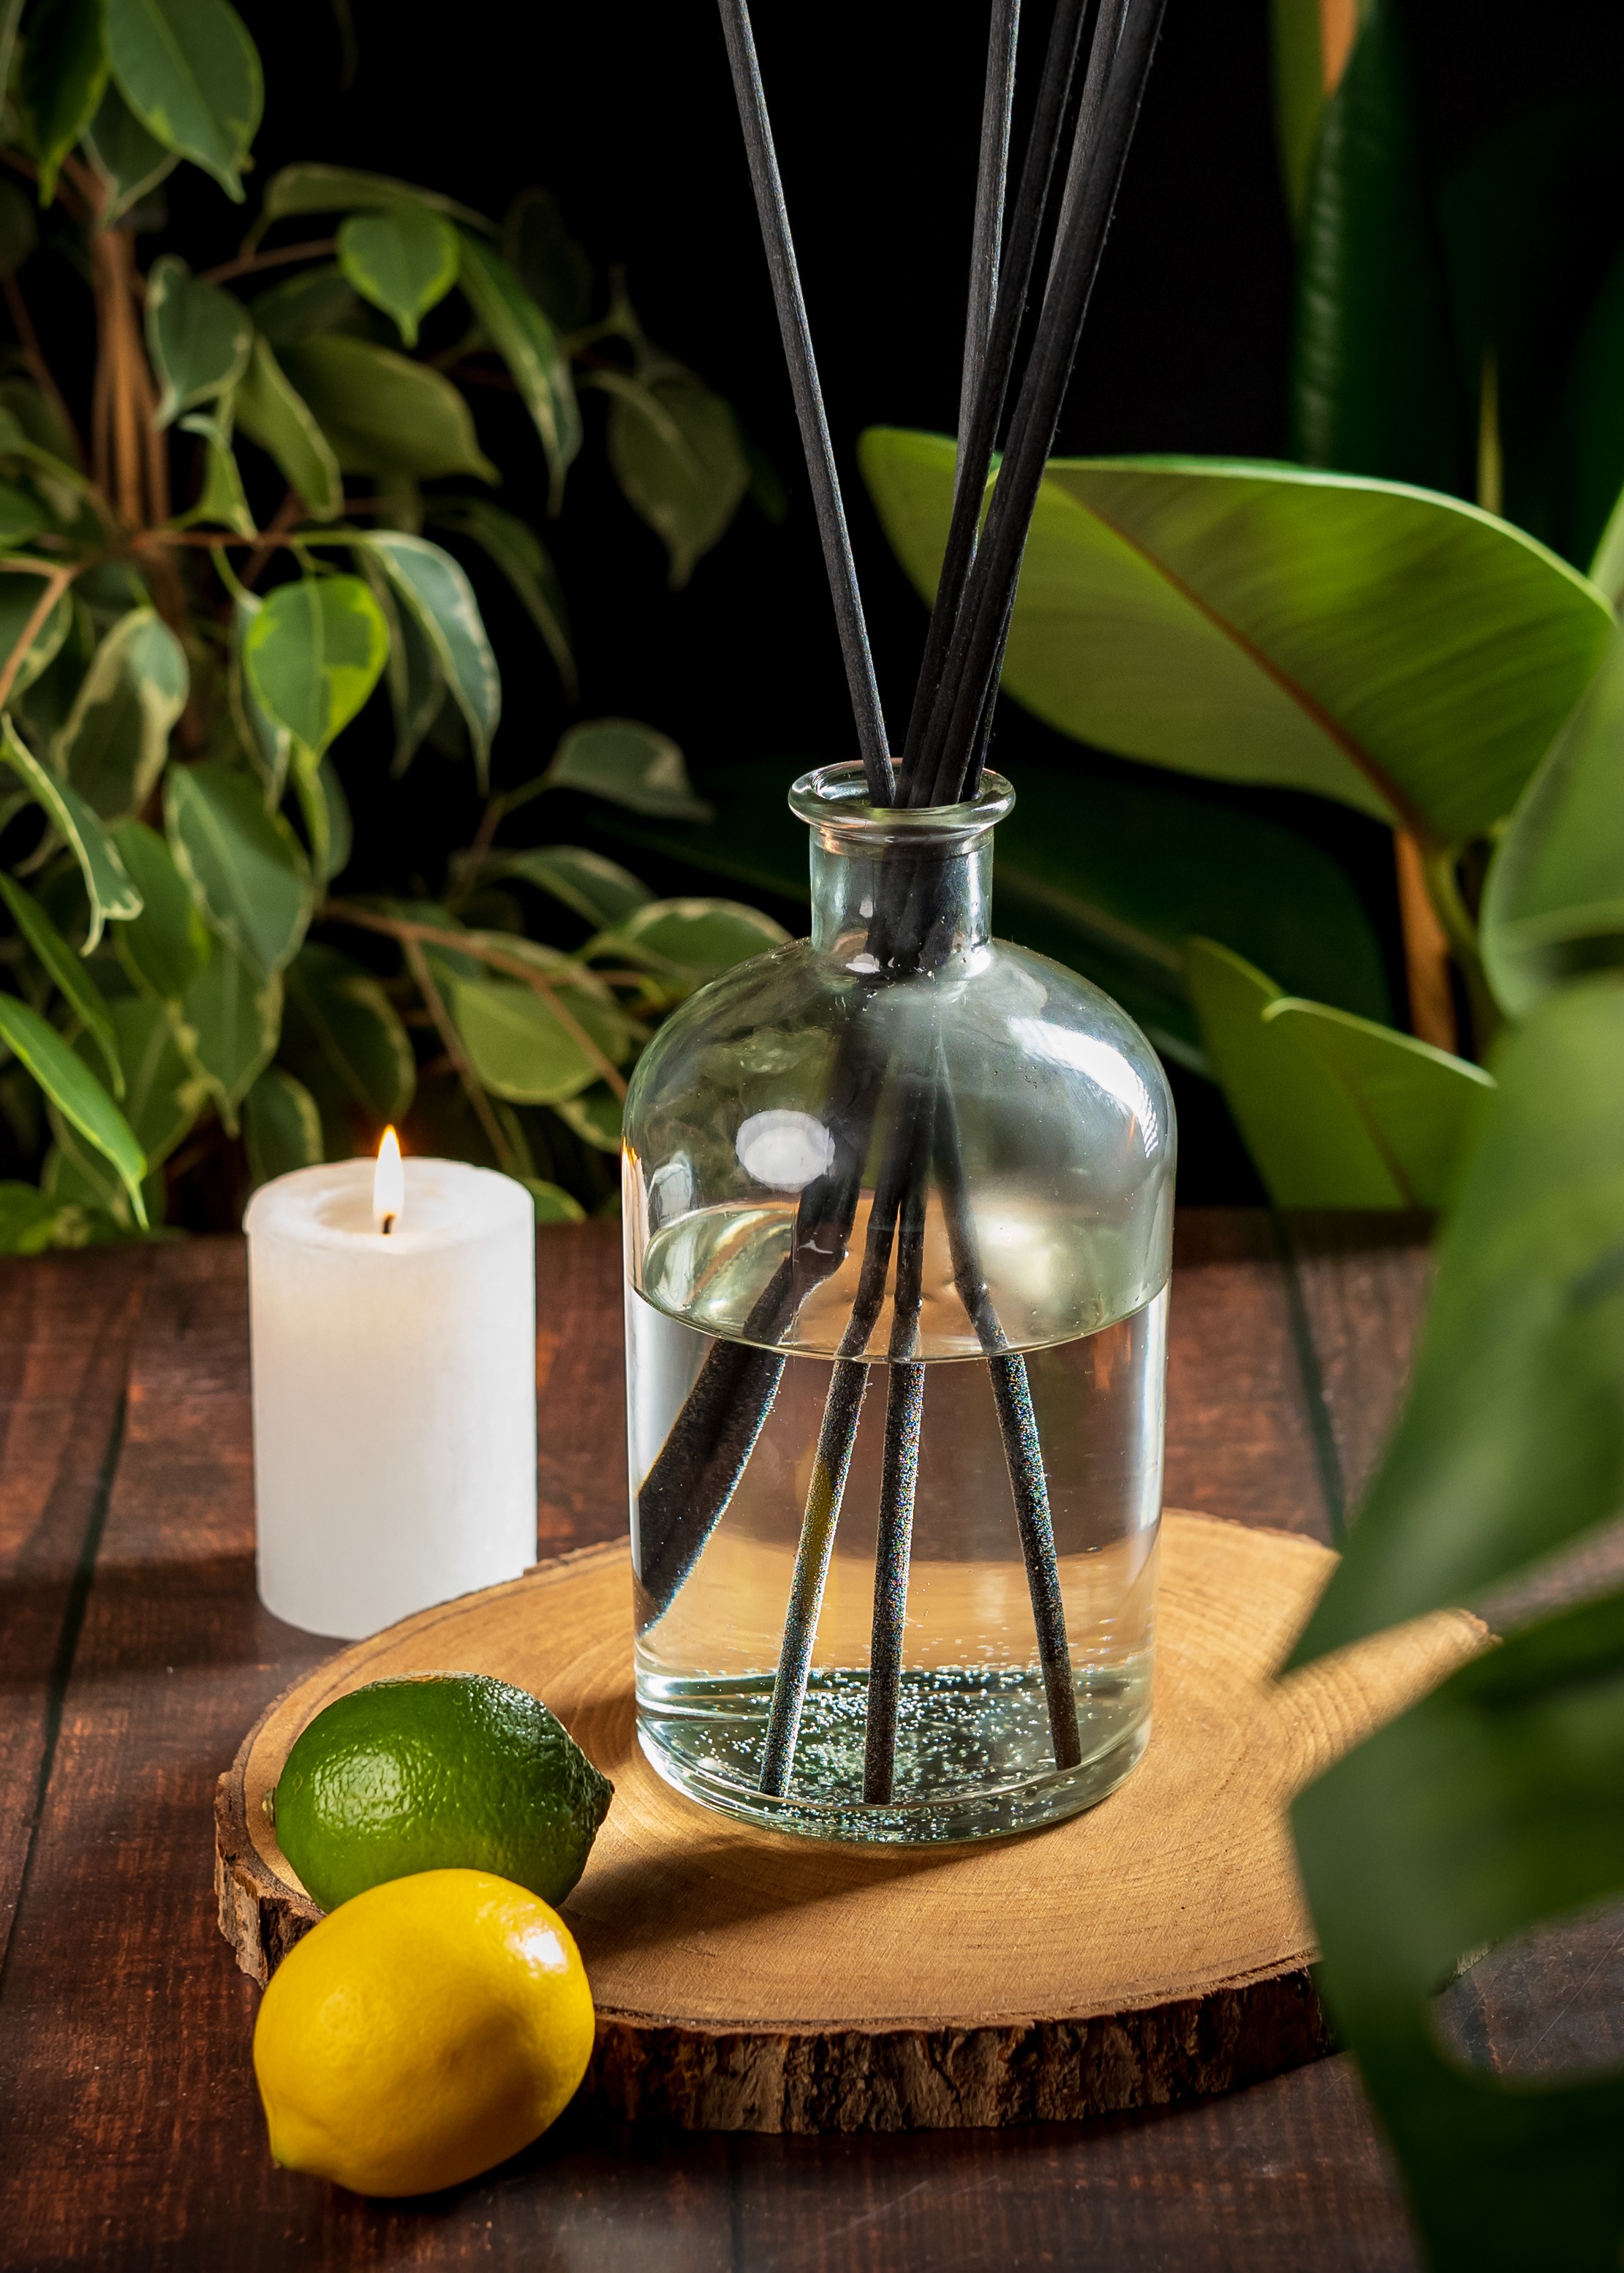 diffuser online course - how to make diffusers